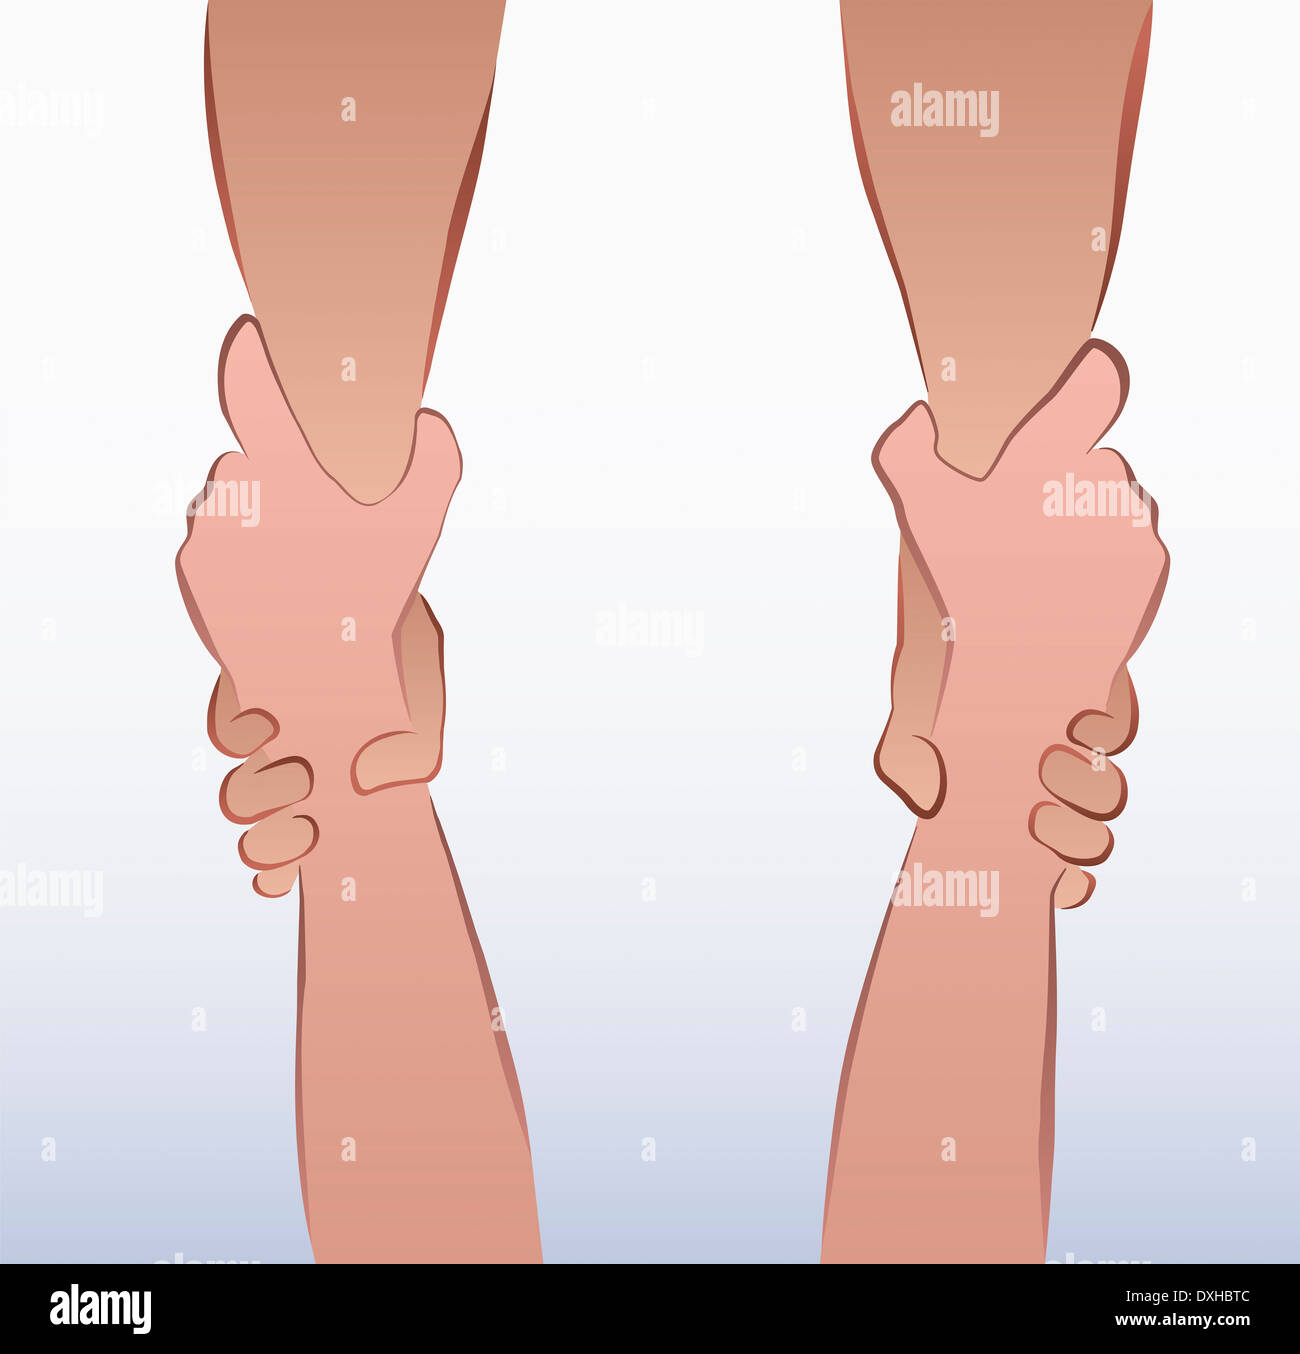 Illustration of a pair of forearms in a rescuing grip. Stock Photo